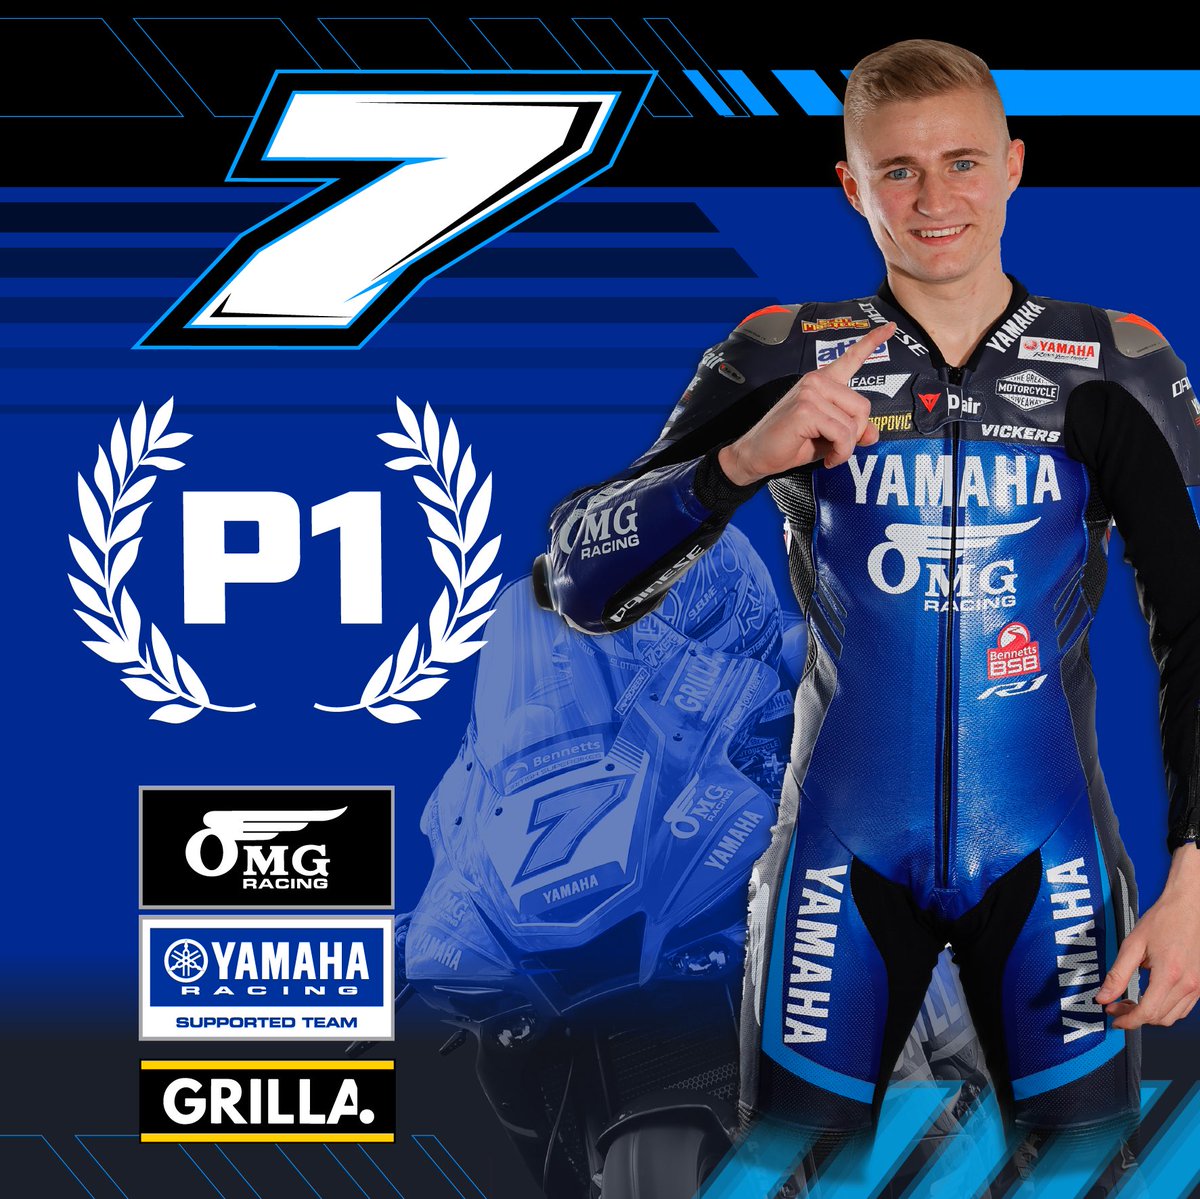 He’s only gone and done it again! @RyanVickers_21 made it through a dramatic final corner save to claim a second win of the day 🏆 #OMGRacingUK #ALLGRILLAnoFILLA #YamahaRacing #RevsYourHeart #WeR1 #NavarraBSB